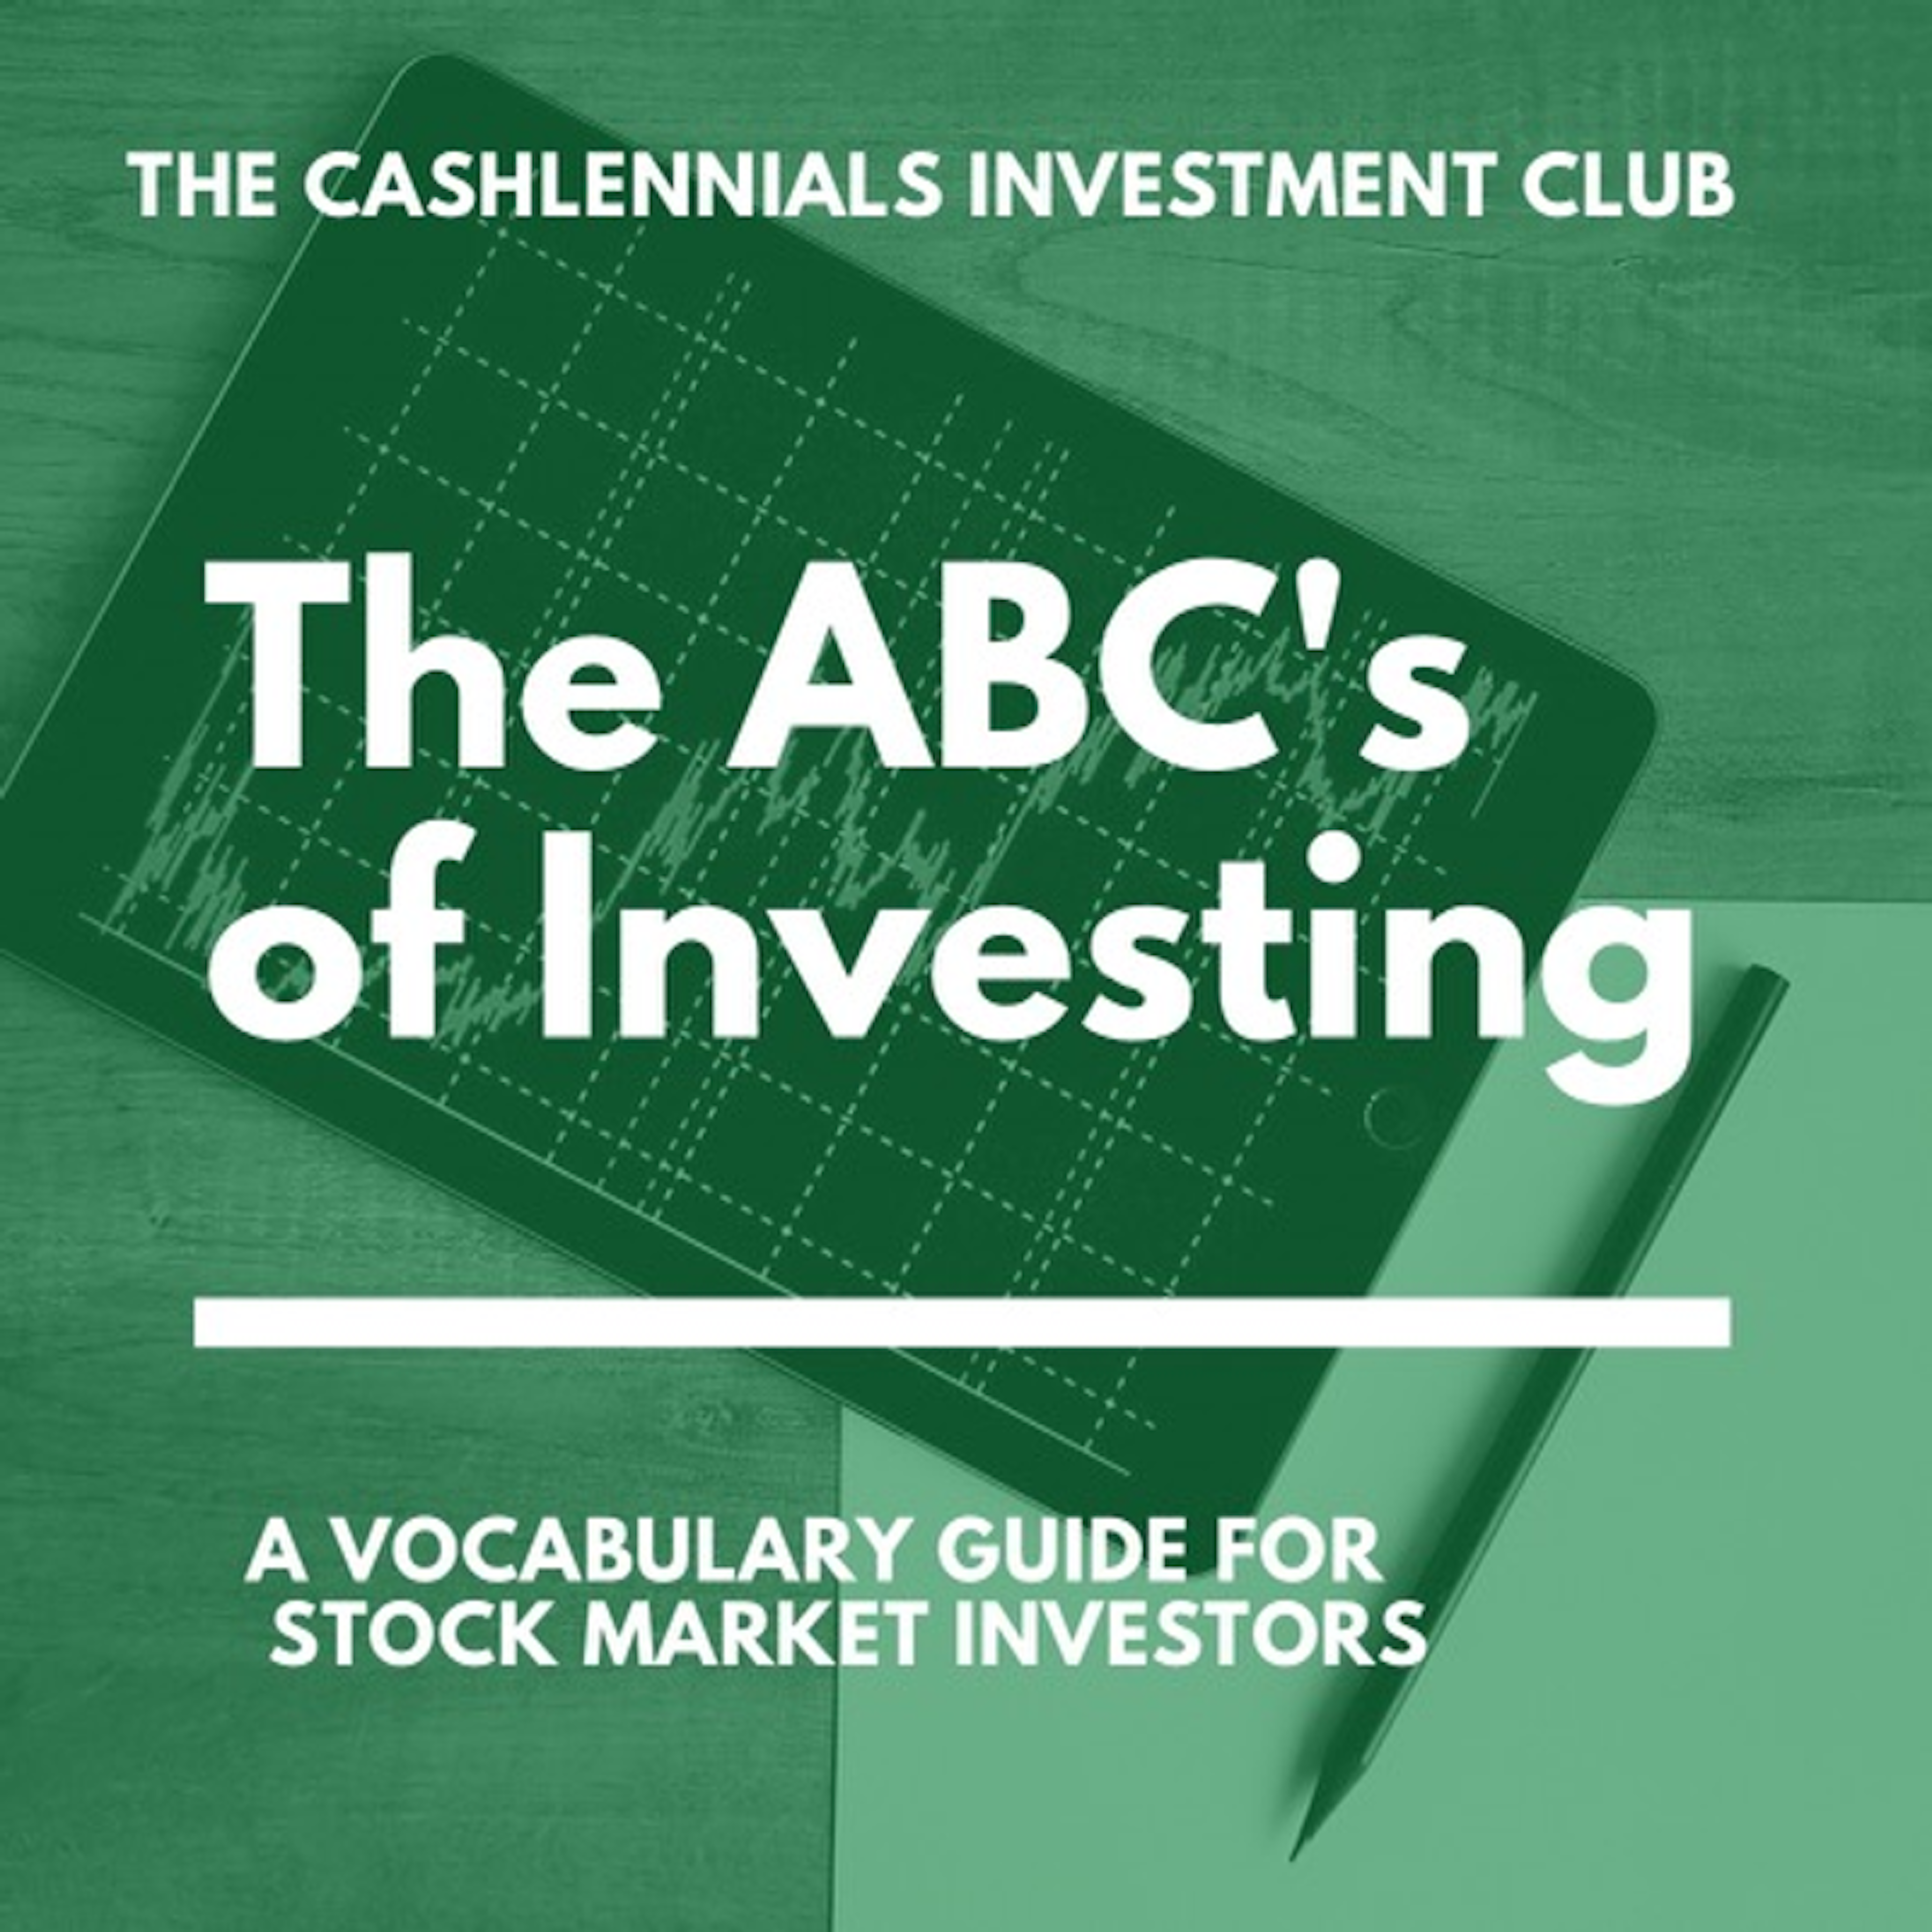 The ABC's of Investing eBook